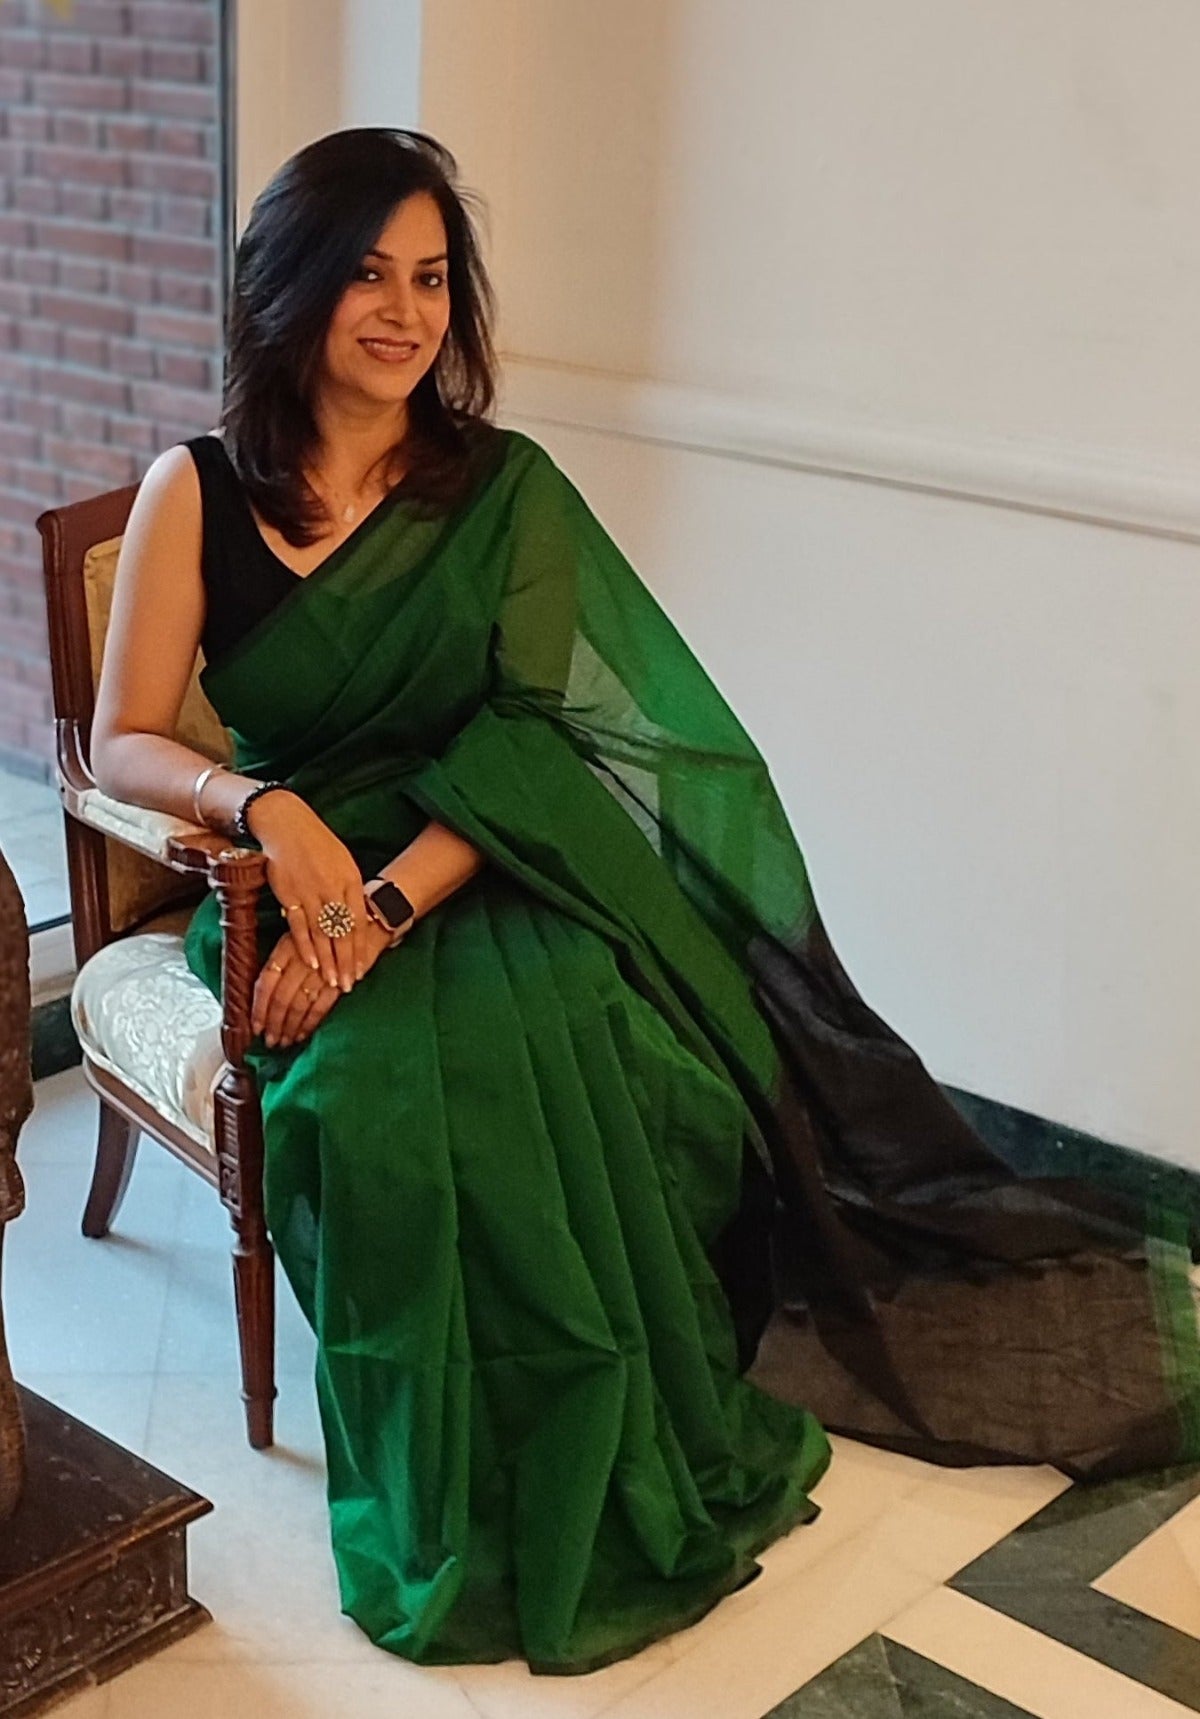 Silk Saree with blouse in Sea green colour 5412